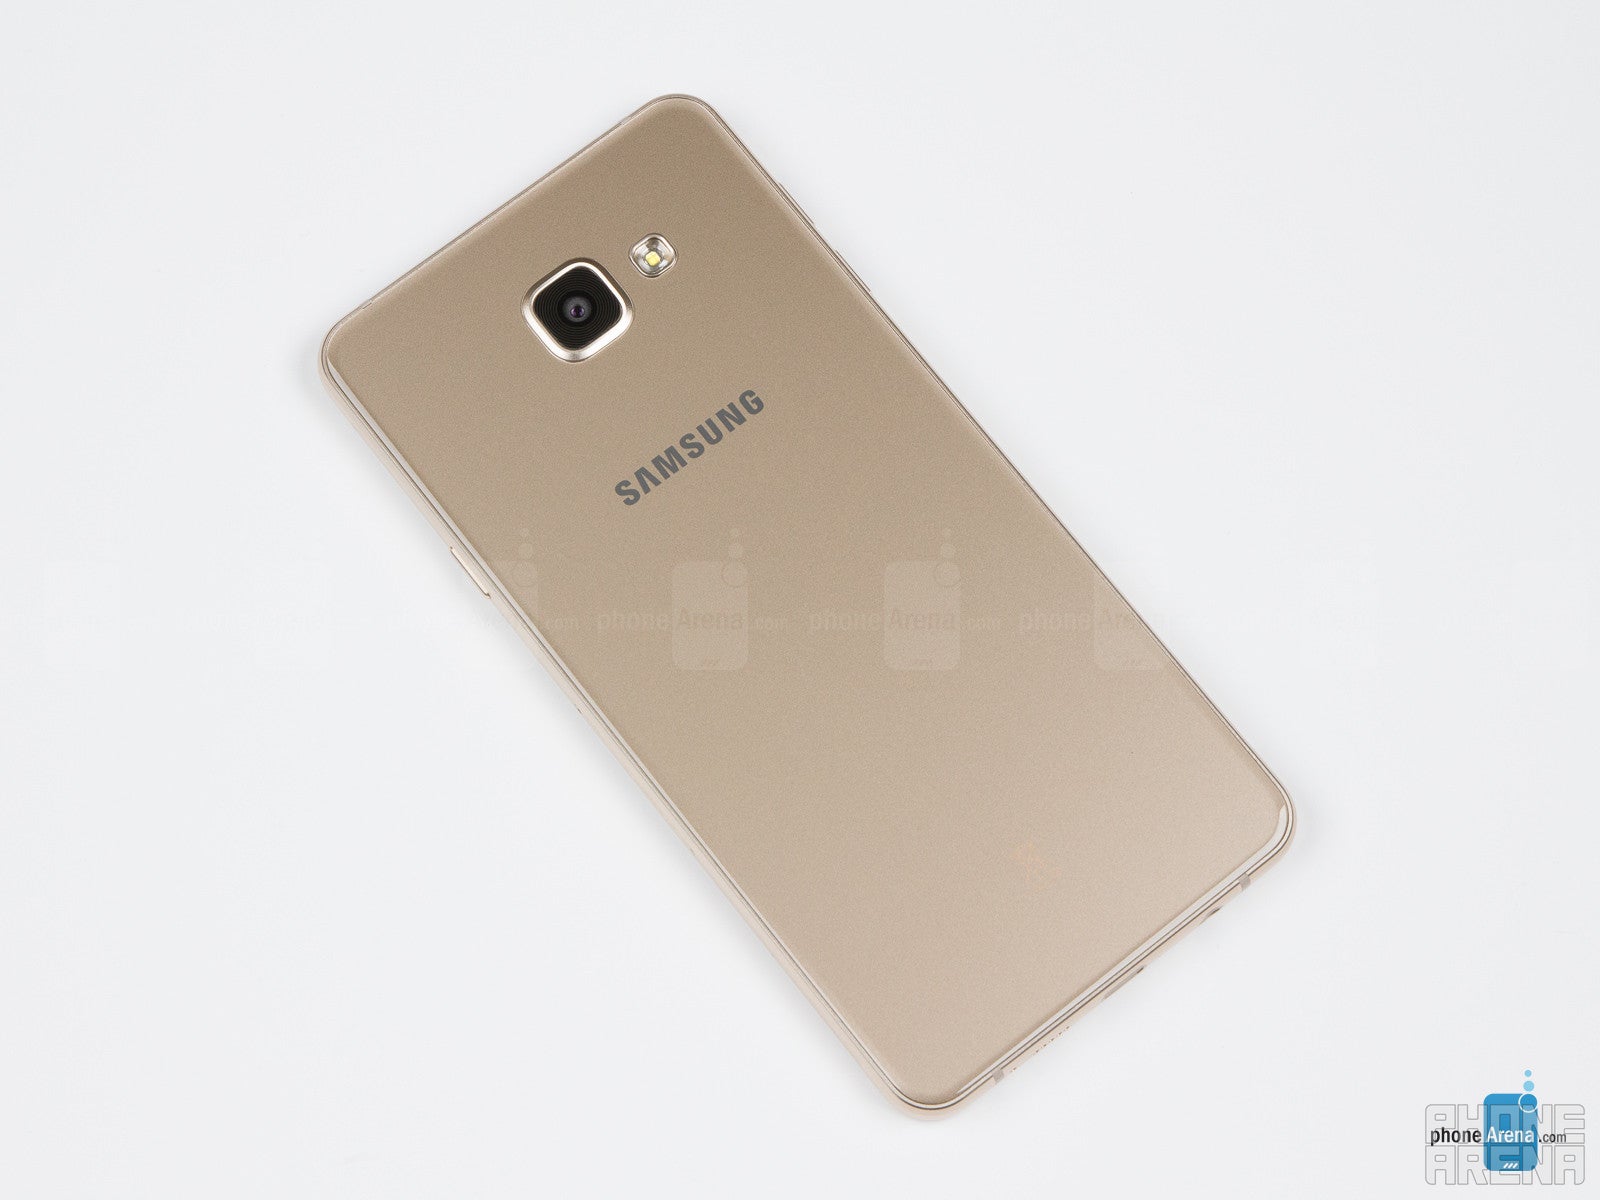 Samsung Galaxy A7 (2016) review